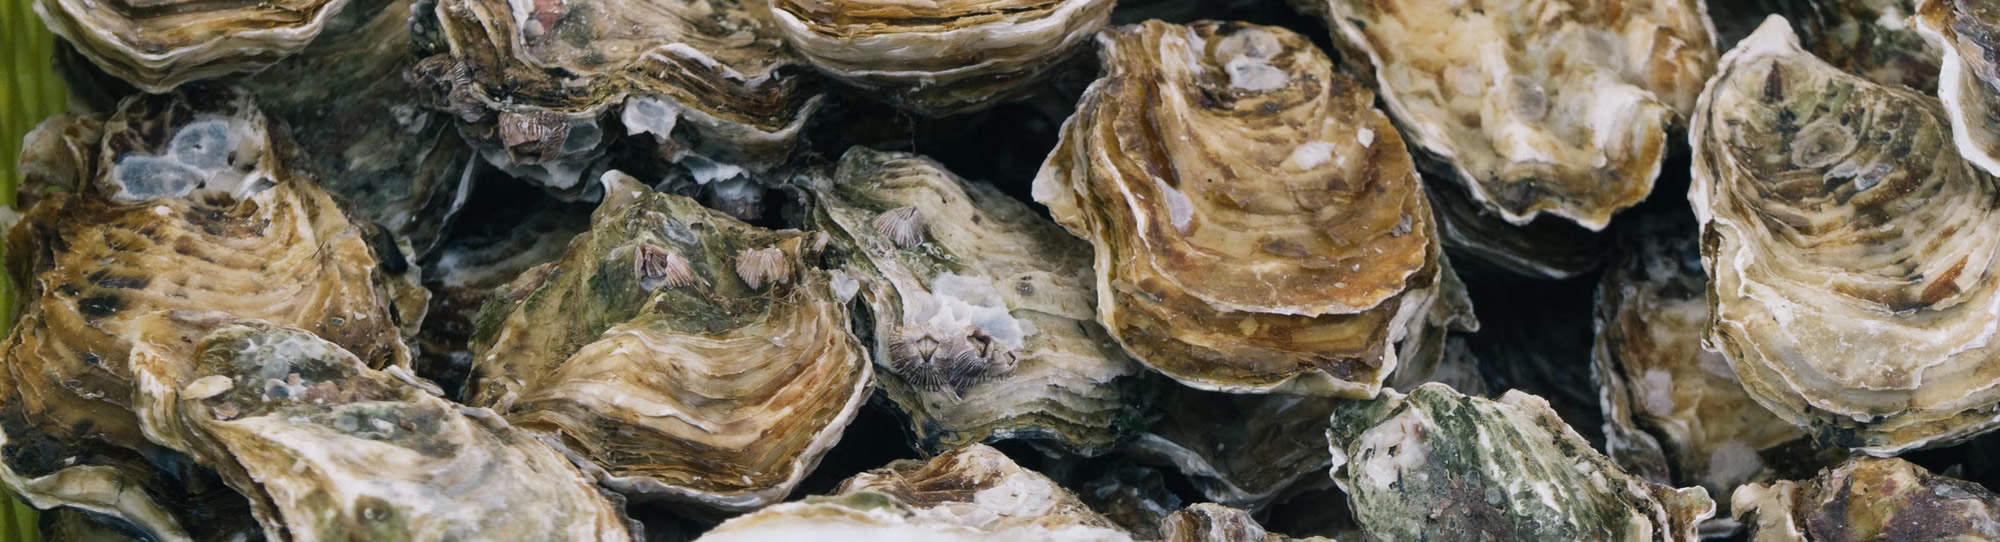 The Wellfleet Oyster: An Excerpted History